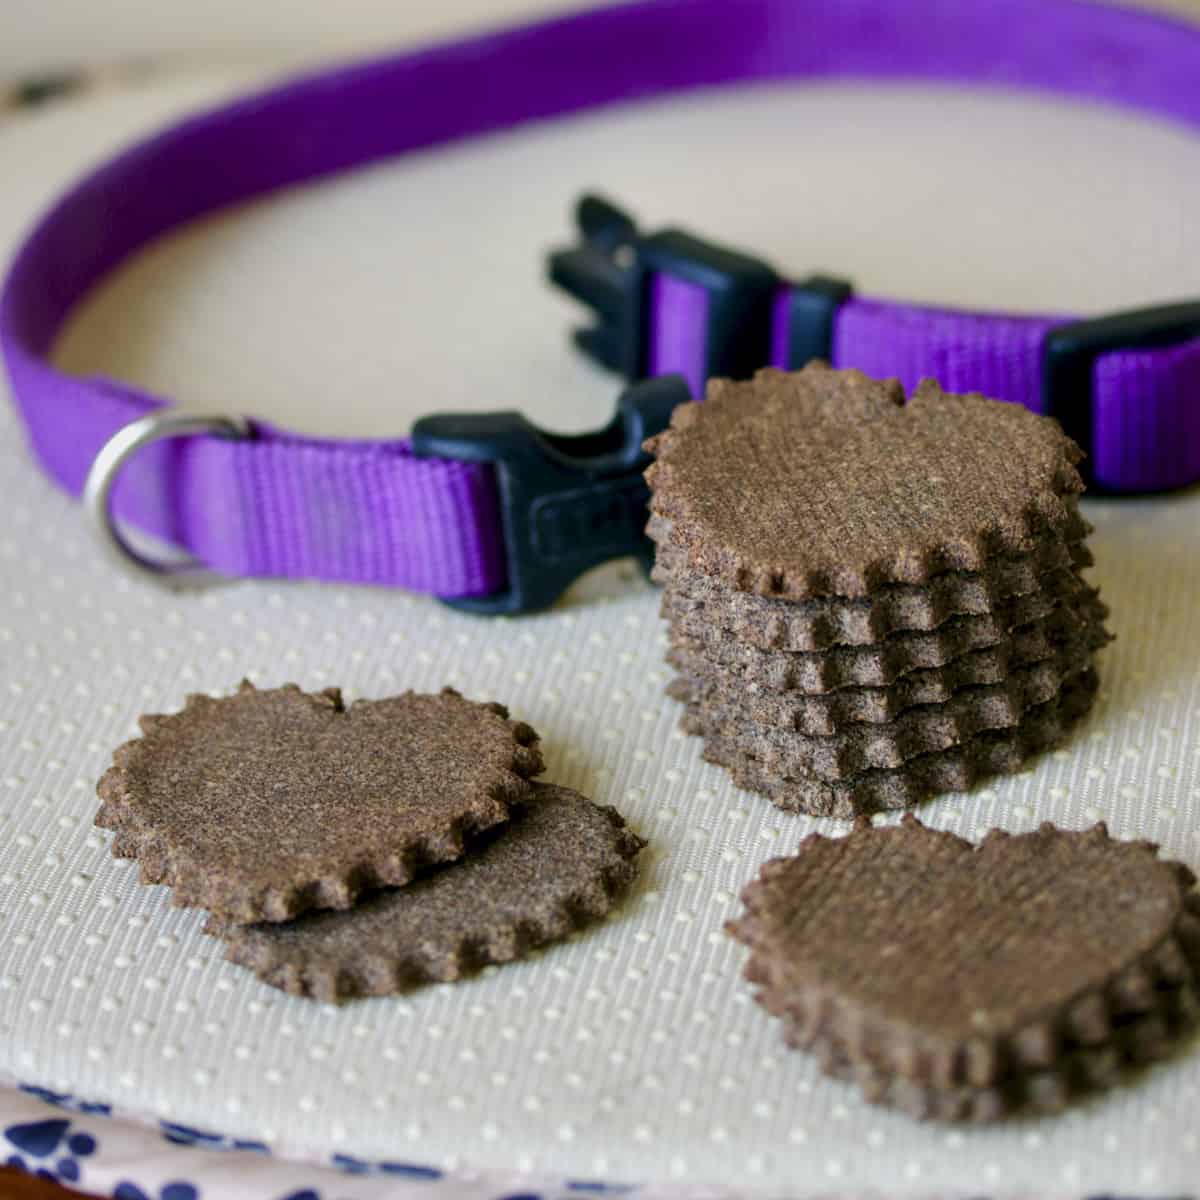 Dog biscuits and purple dog collar.